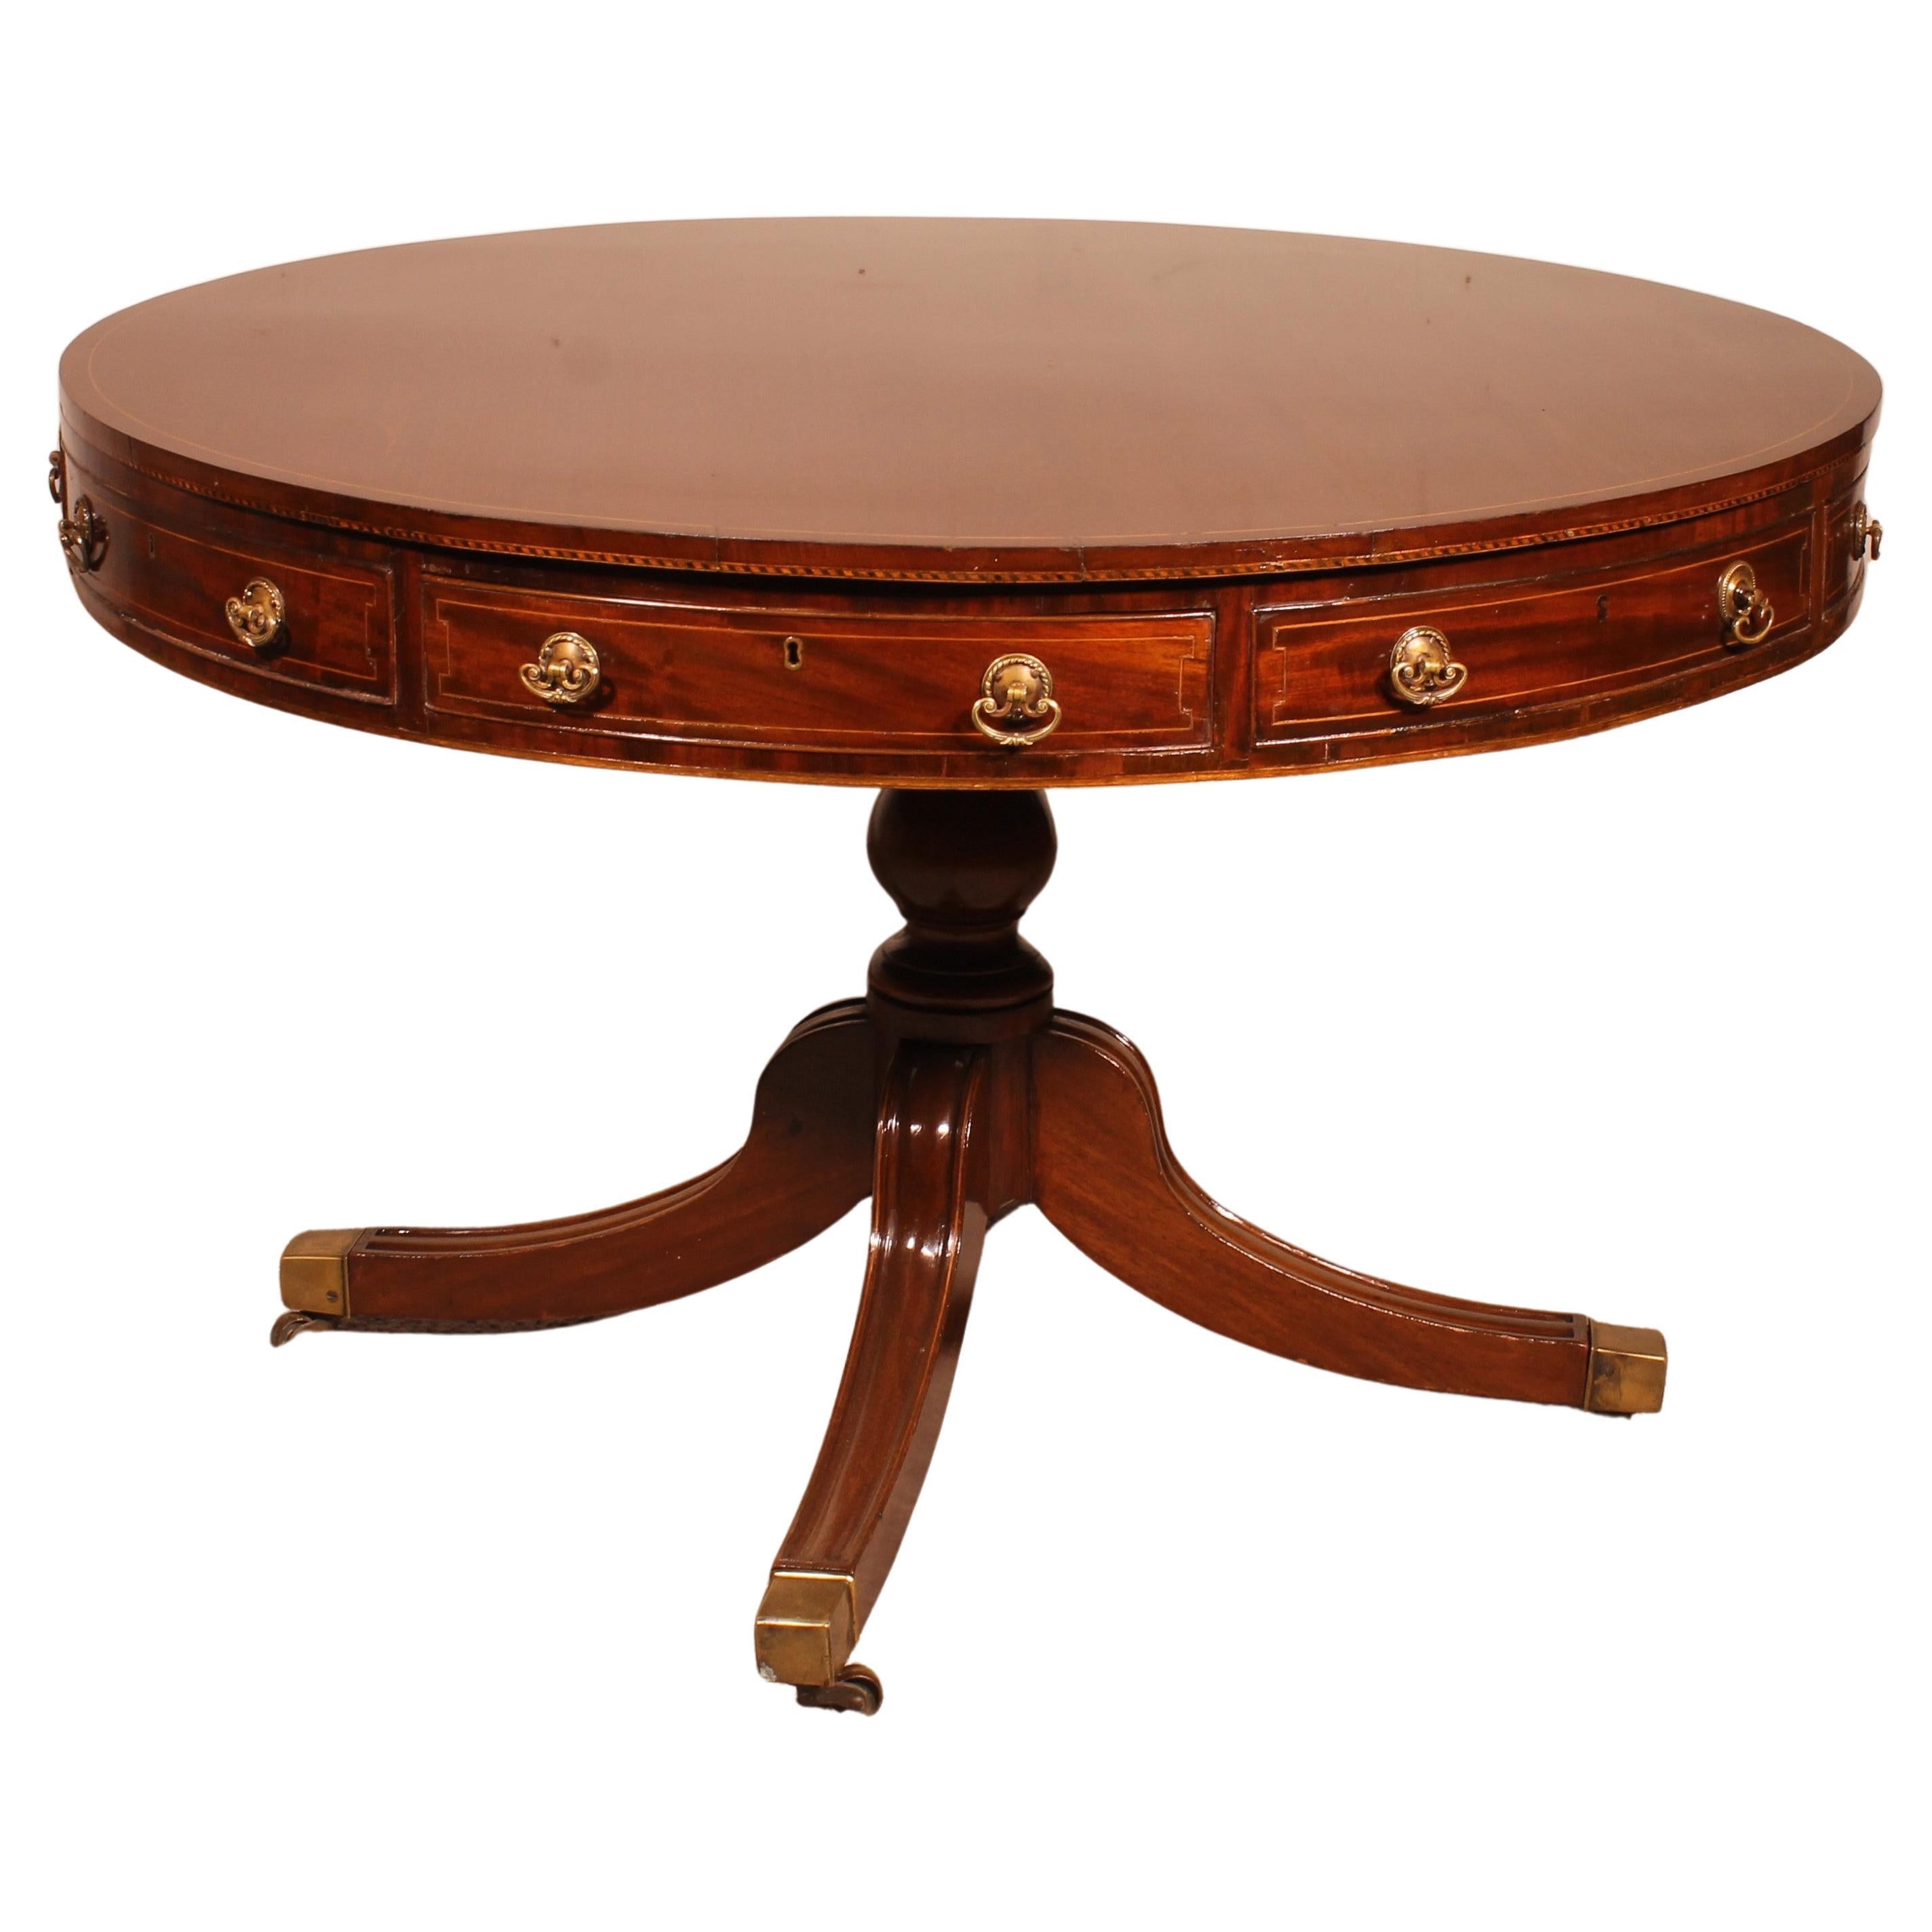 English Table Called Drum Table in Mahogany circa 1820, Regency Period